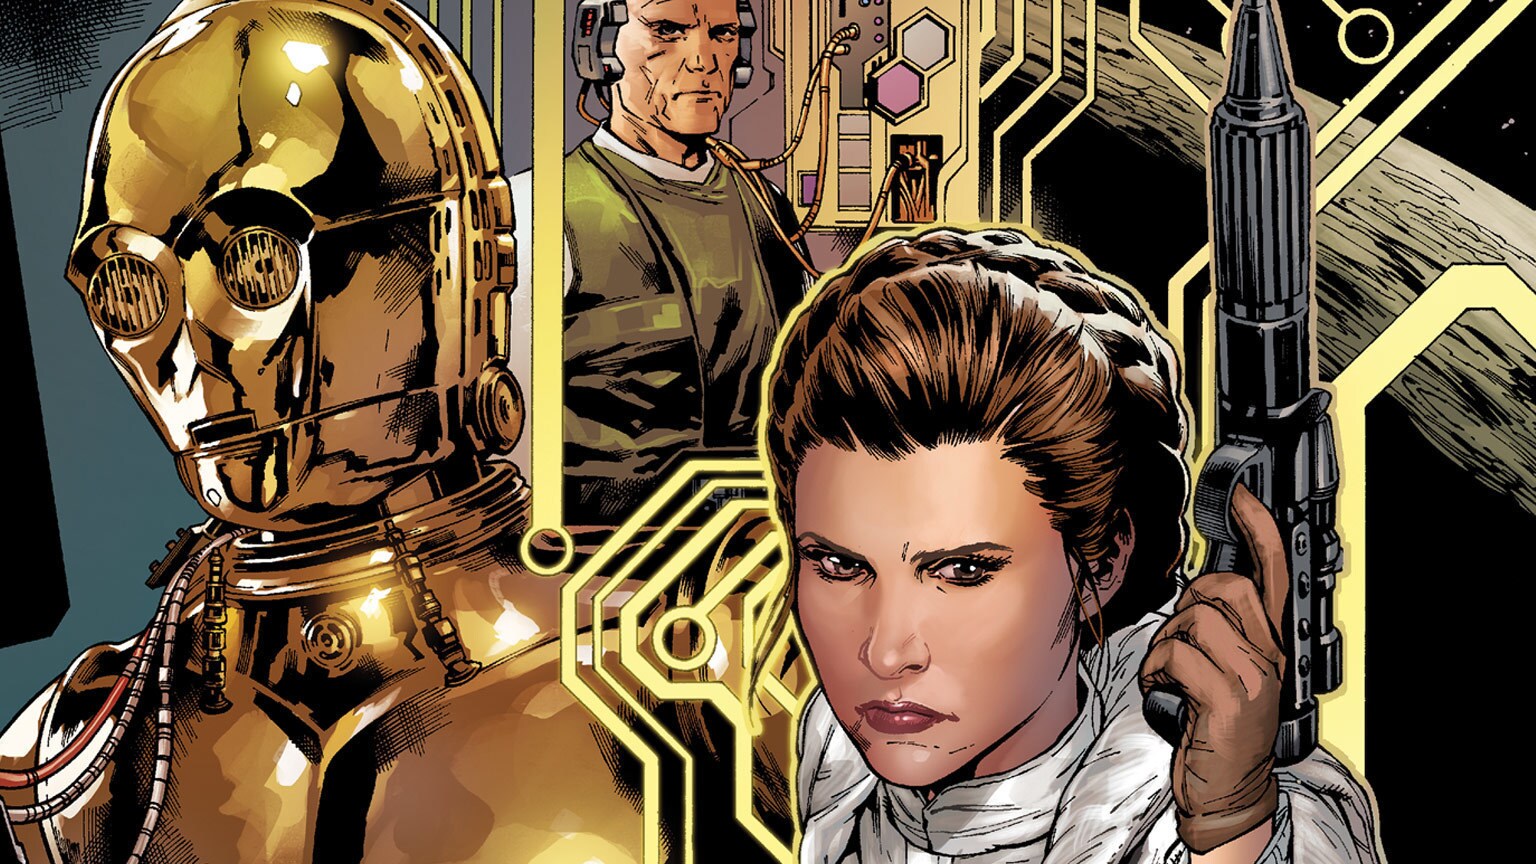 Luke, Leia, and Lando Plan a Heist in Marvel’s Star Wars #9 - Exclusive Preview